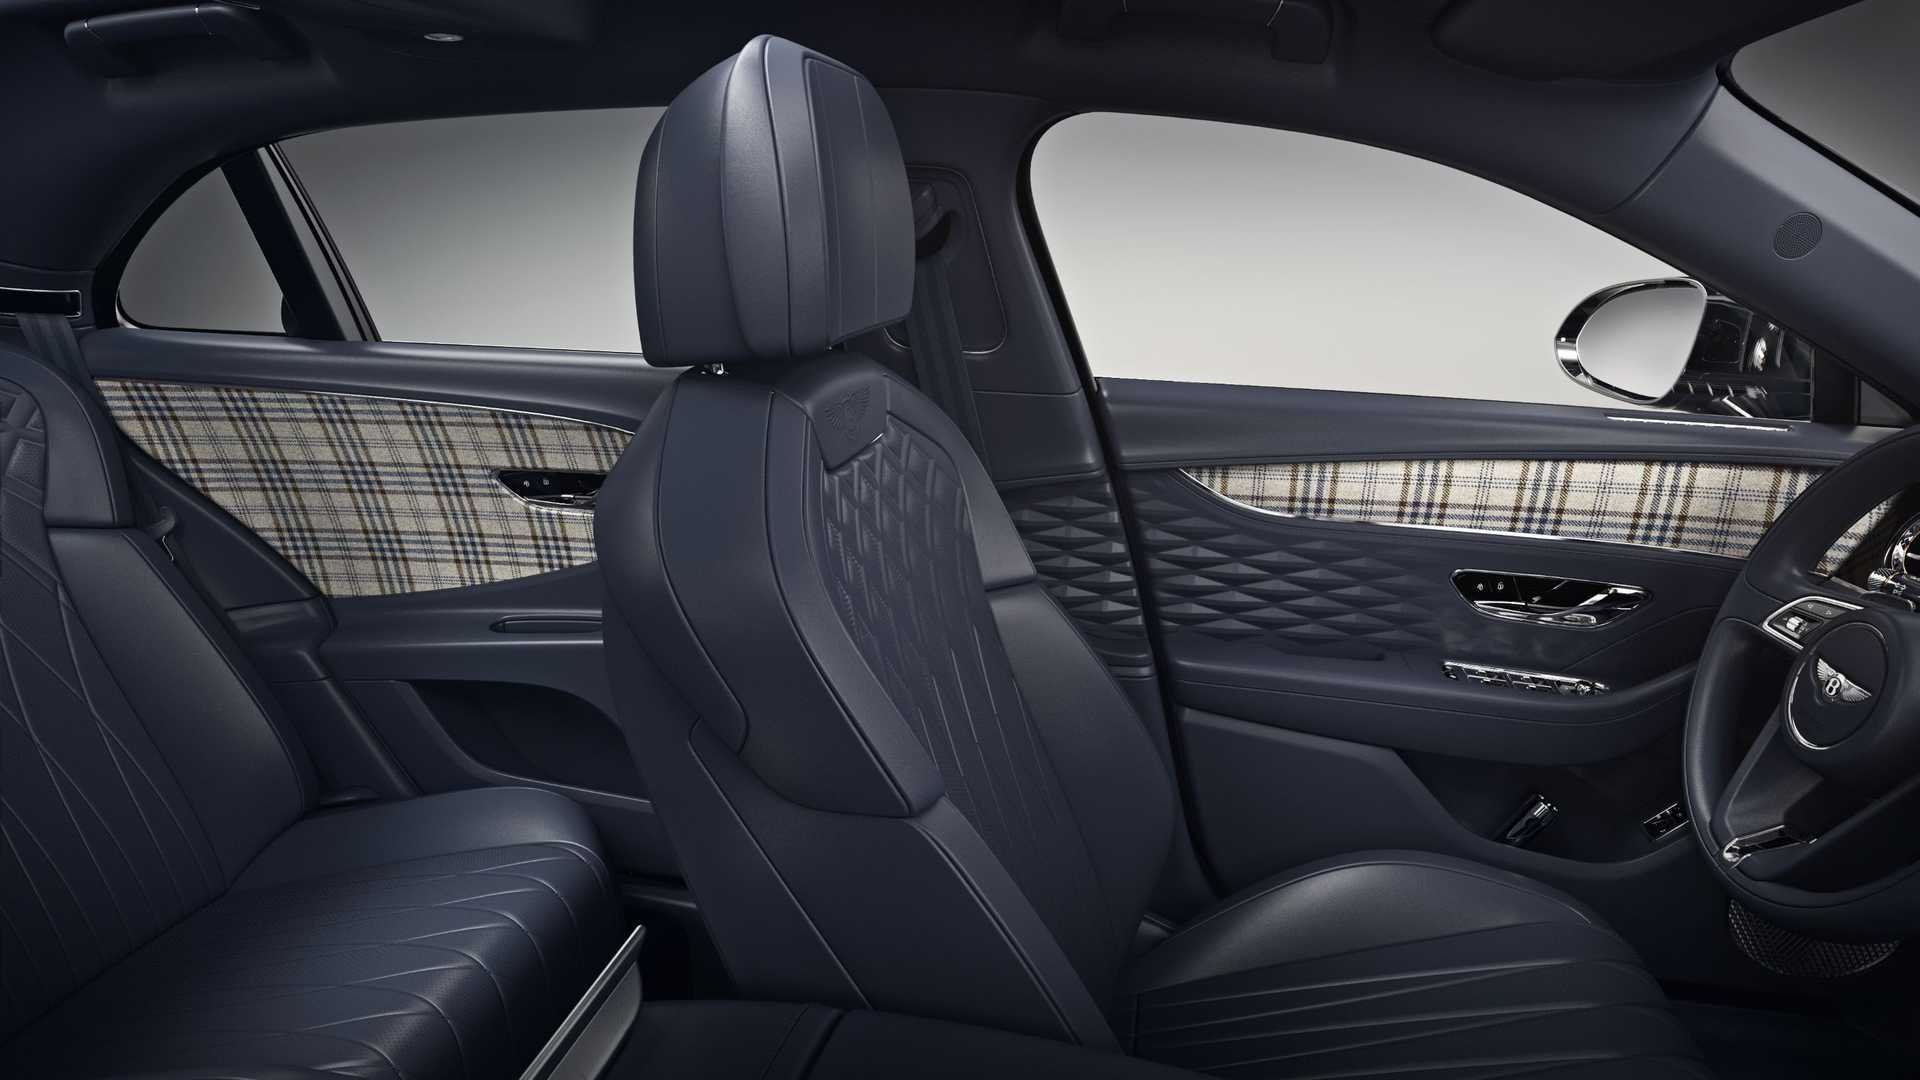 Bentley's New Tweed Interior Option Is The Most British Thing Ever